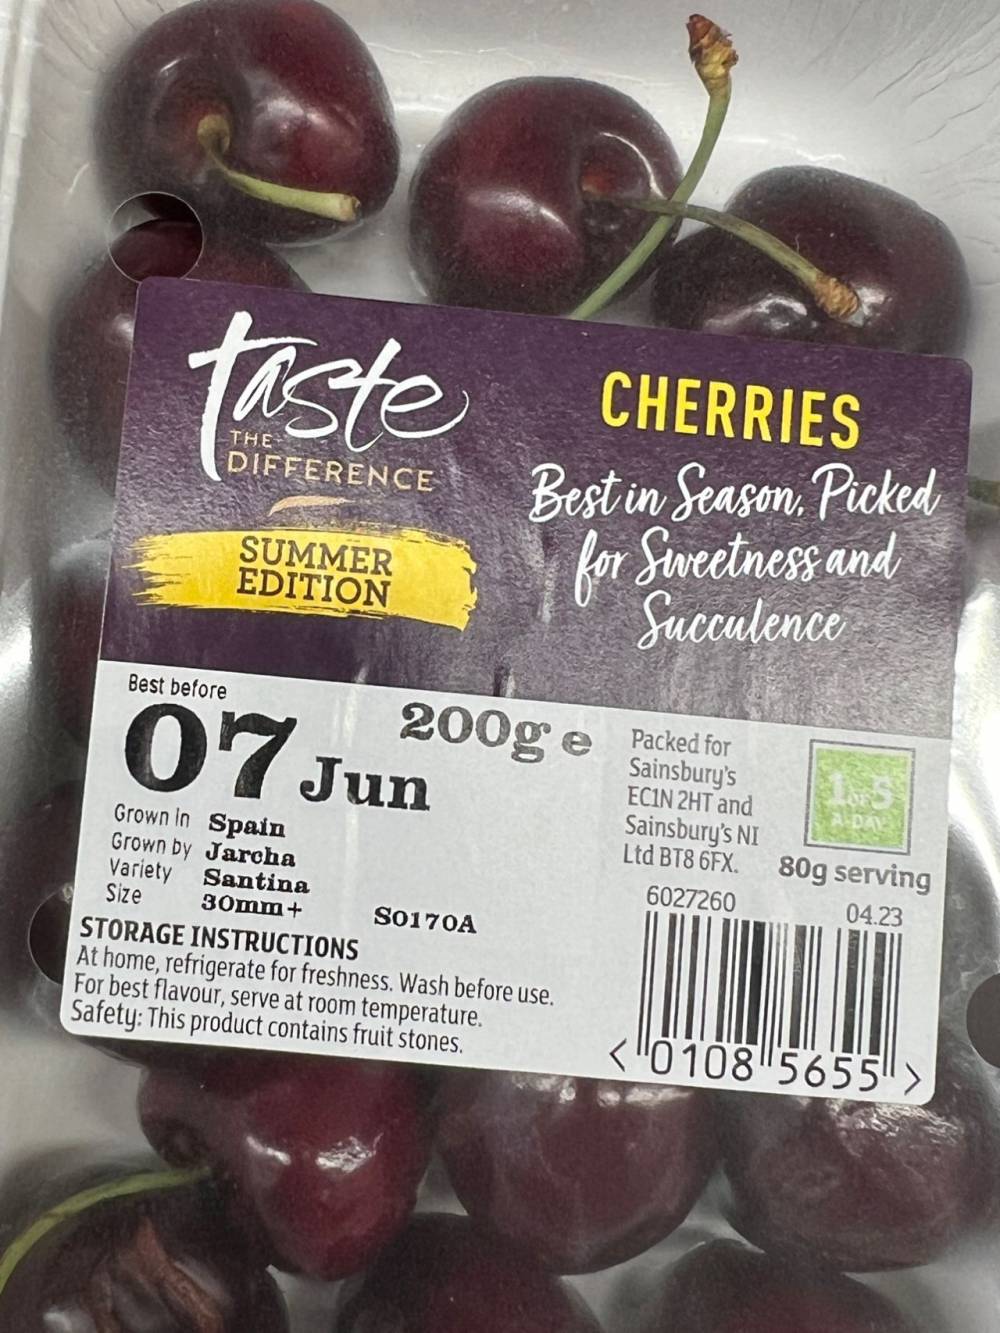 All cherries are not the same: Sainsbury's marketing lesson